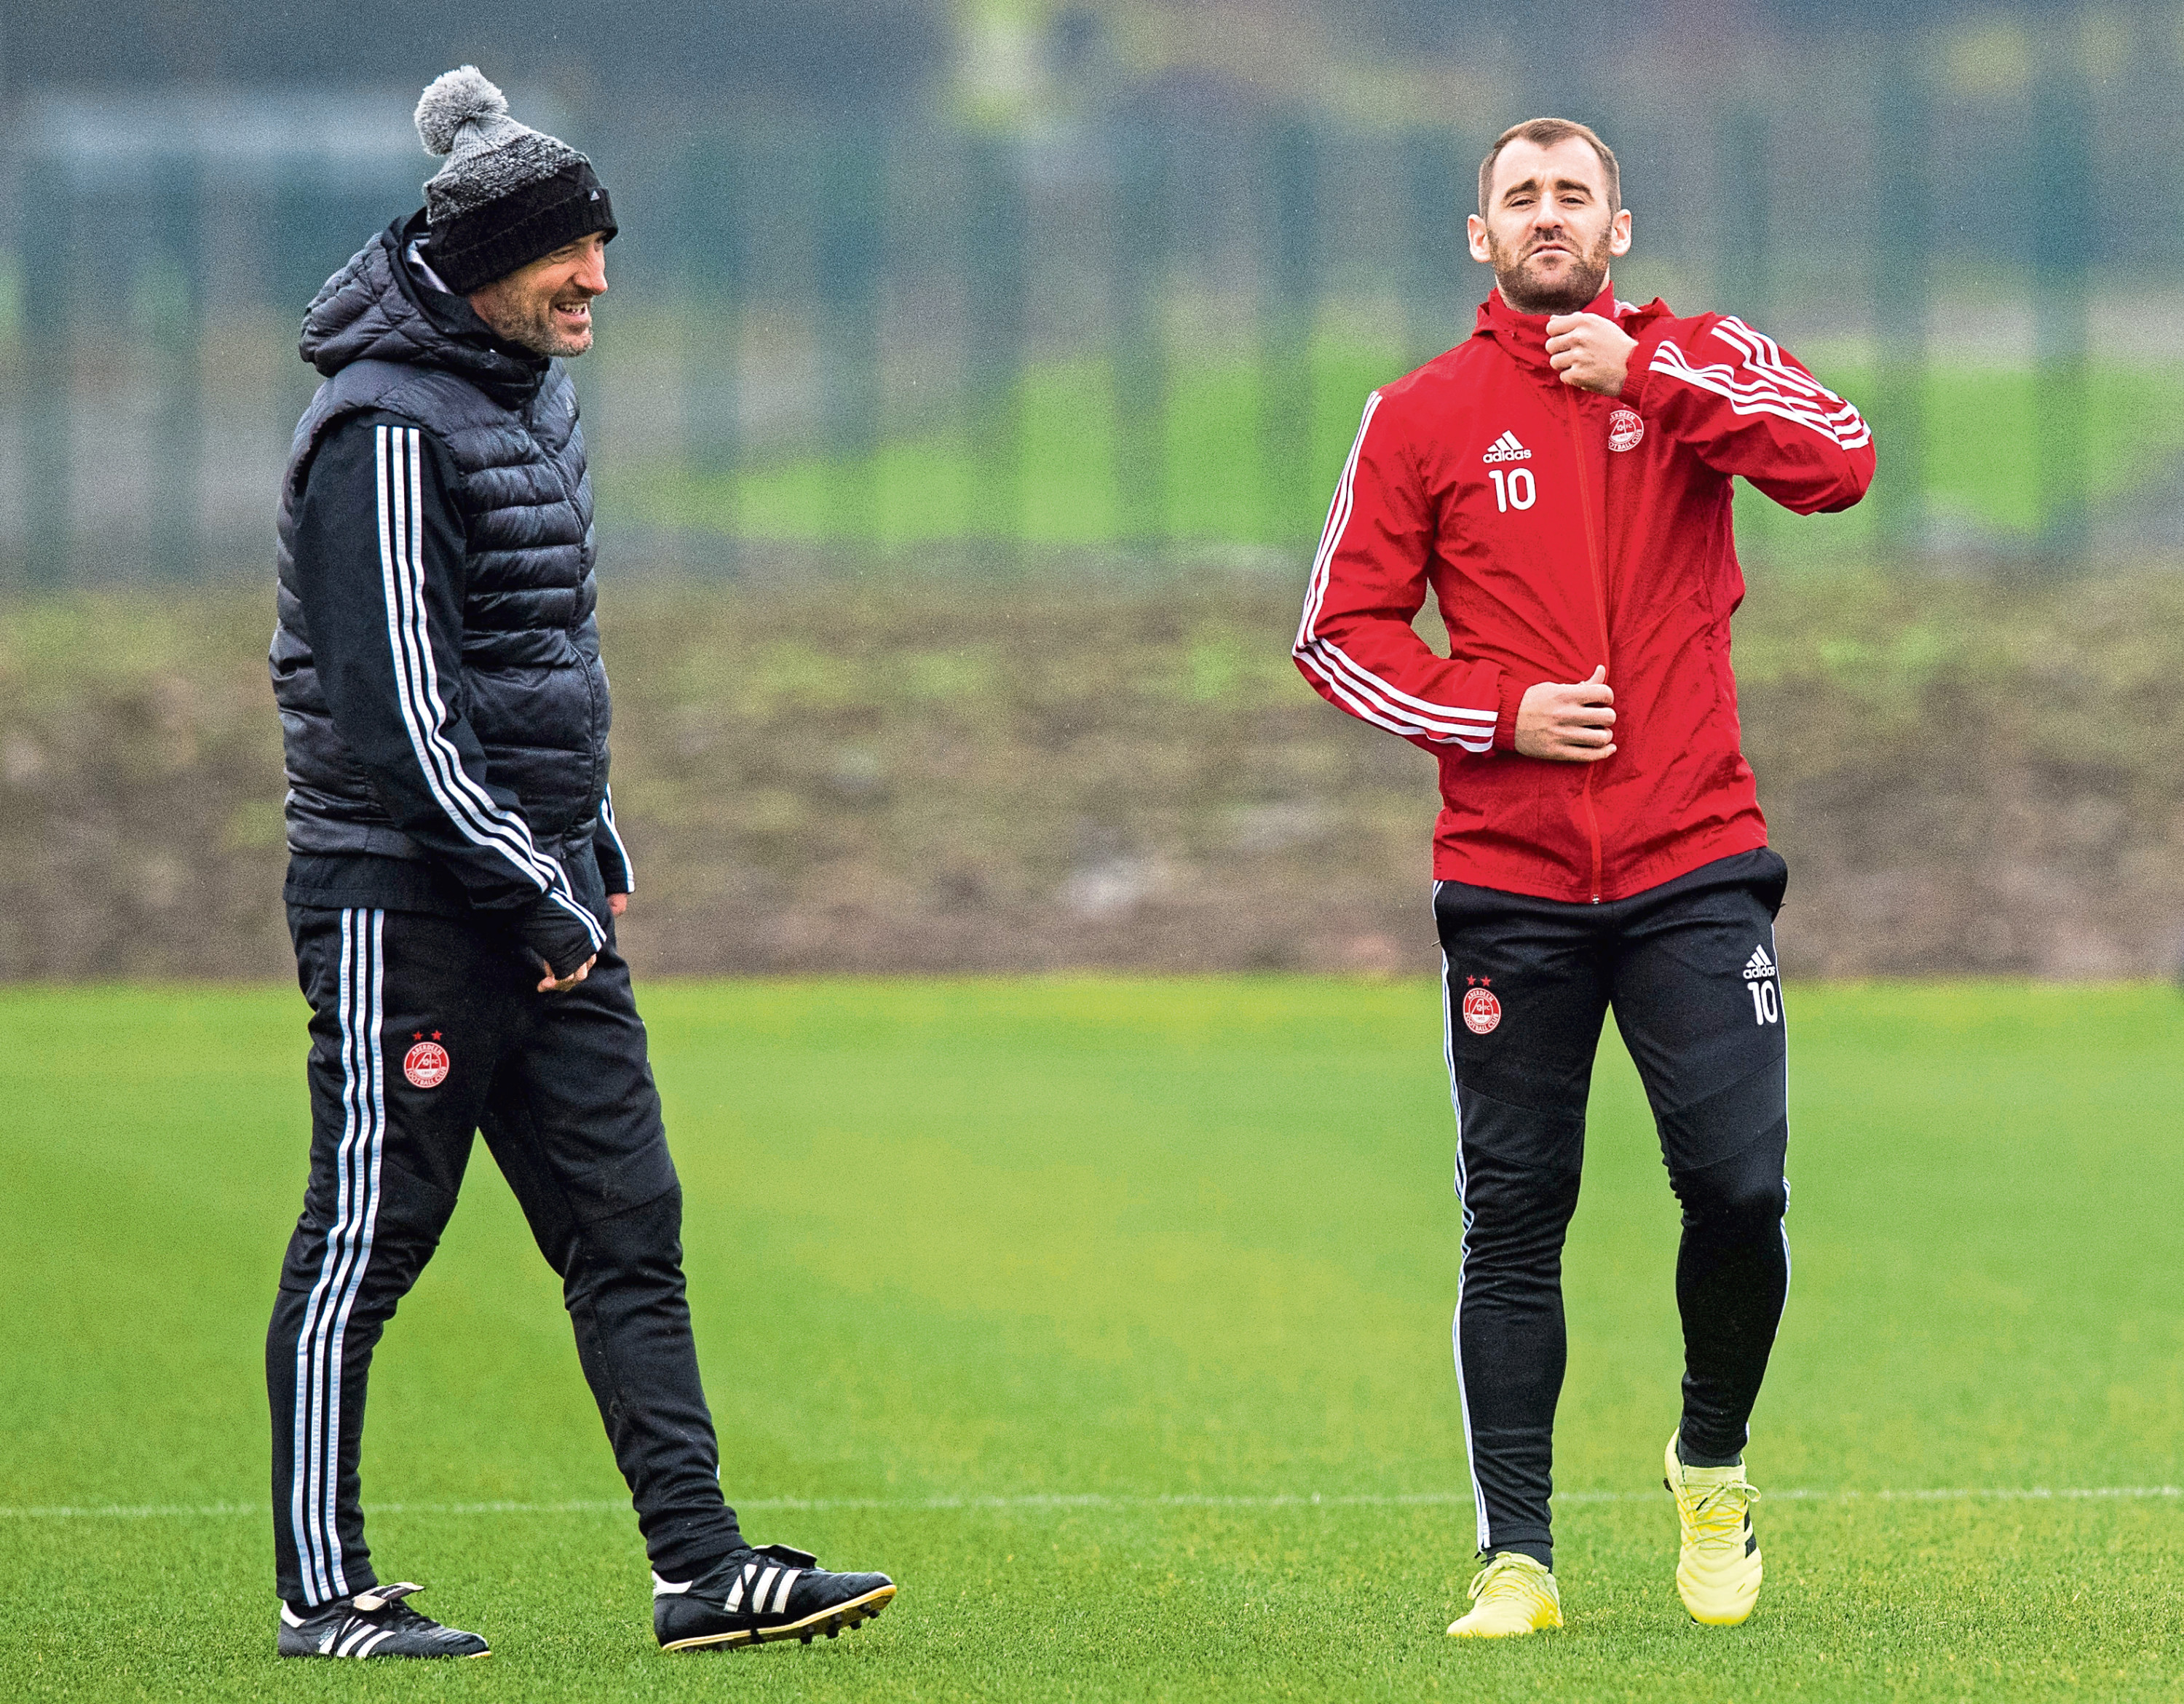 Niall McGinn and Tony Docherty during Aberdeen training at Cormack Park.